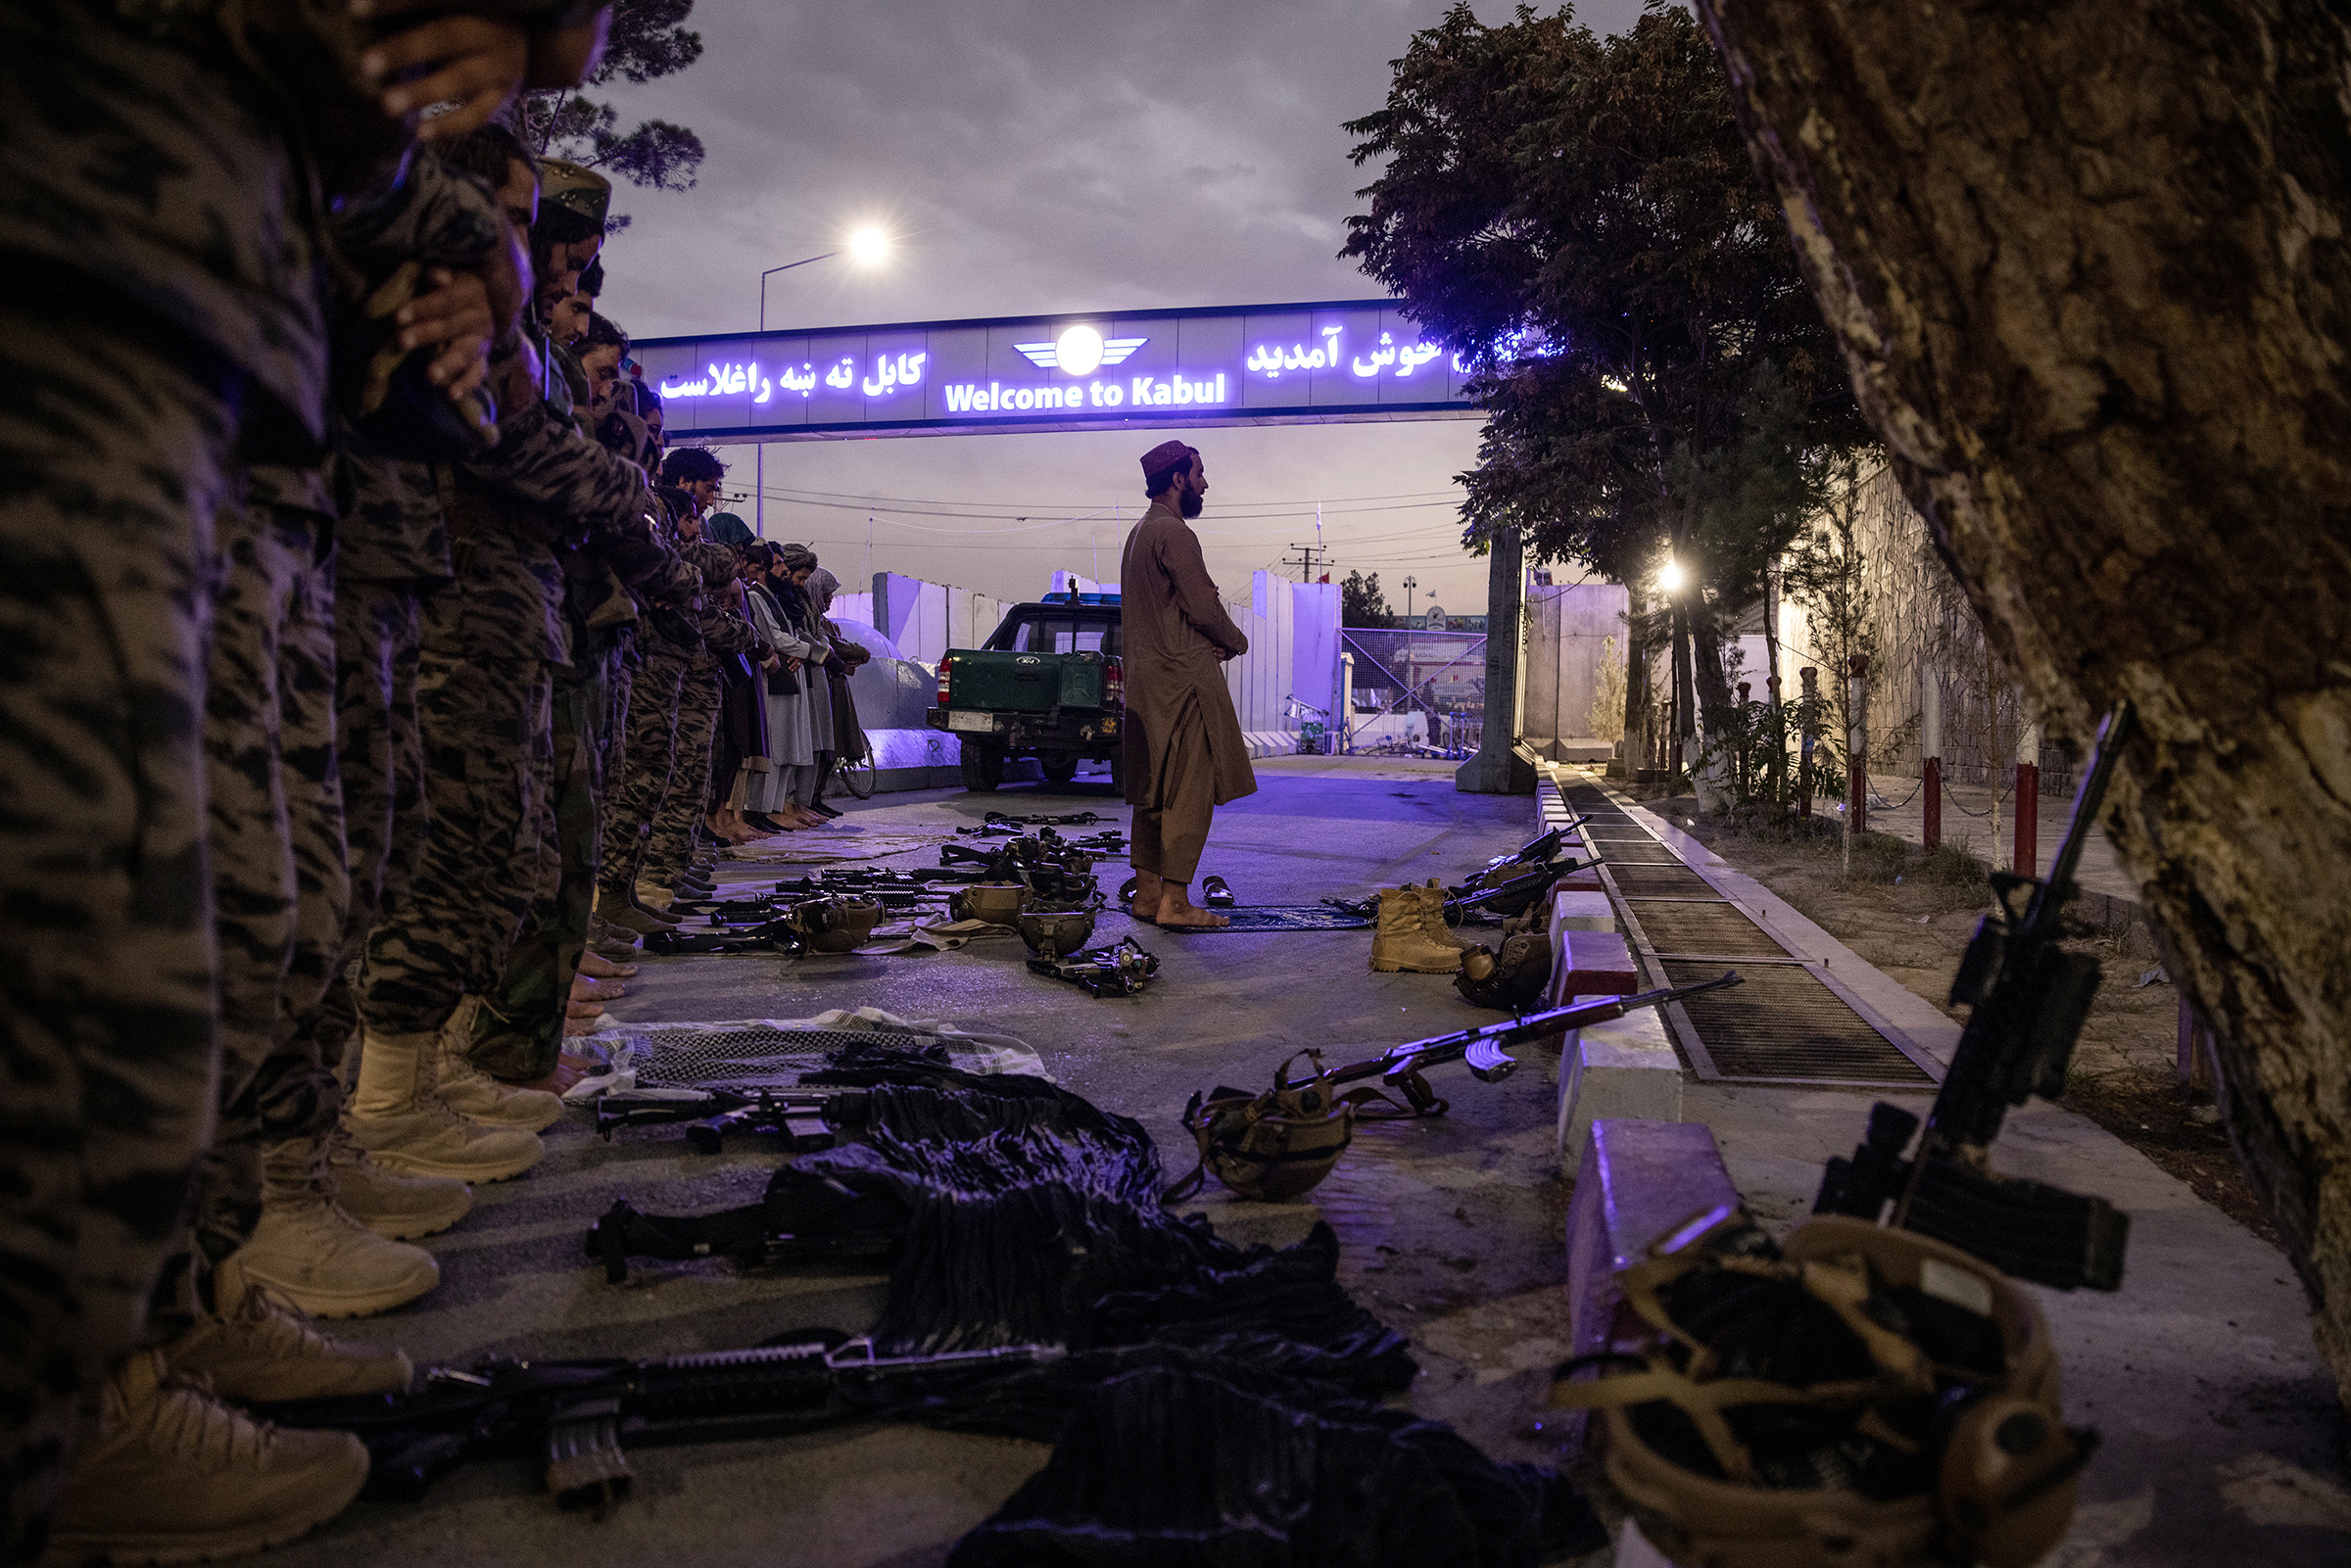 Members of the Badri 313 Battalion, a group of Taliban special forces fighters, tasked with securing Hamid Karzai International Airport and the surrounding area, perform evening prayers in Kabul, Afghanistan on Saturday, Aug. 28, 2021. (Jim Huylebroek/The